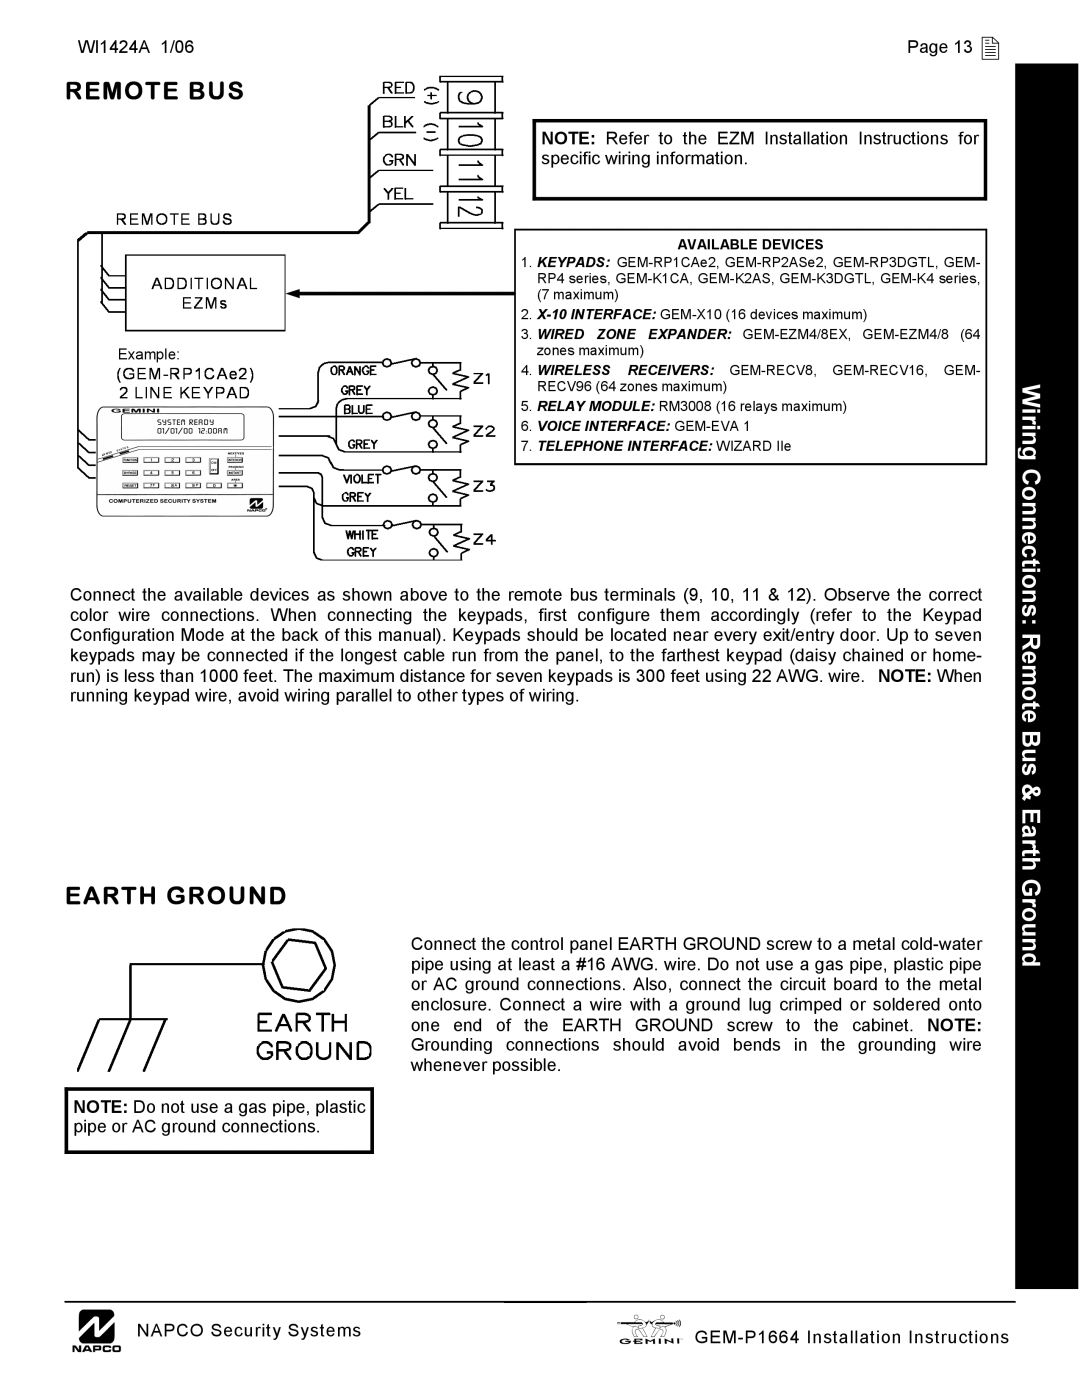 Napco Security Technologies GEM-P1664 installation instructions Wiring Connections Remote Bus & Earth Ground 